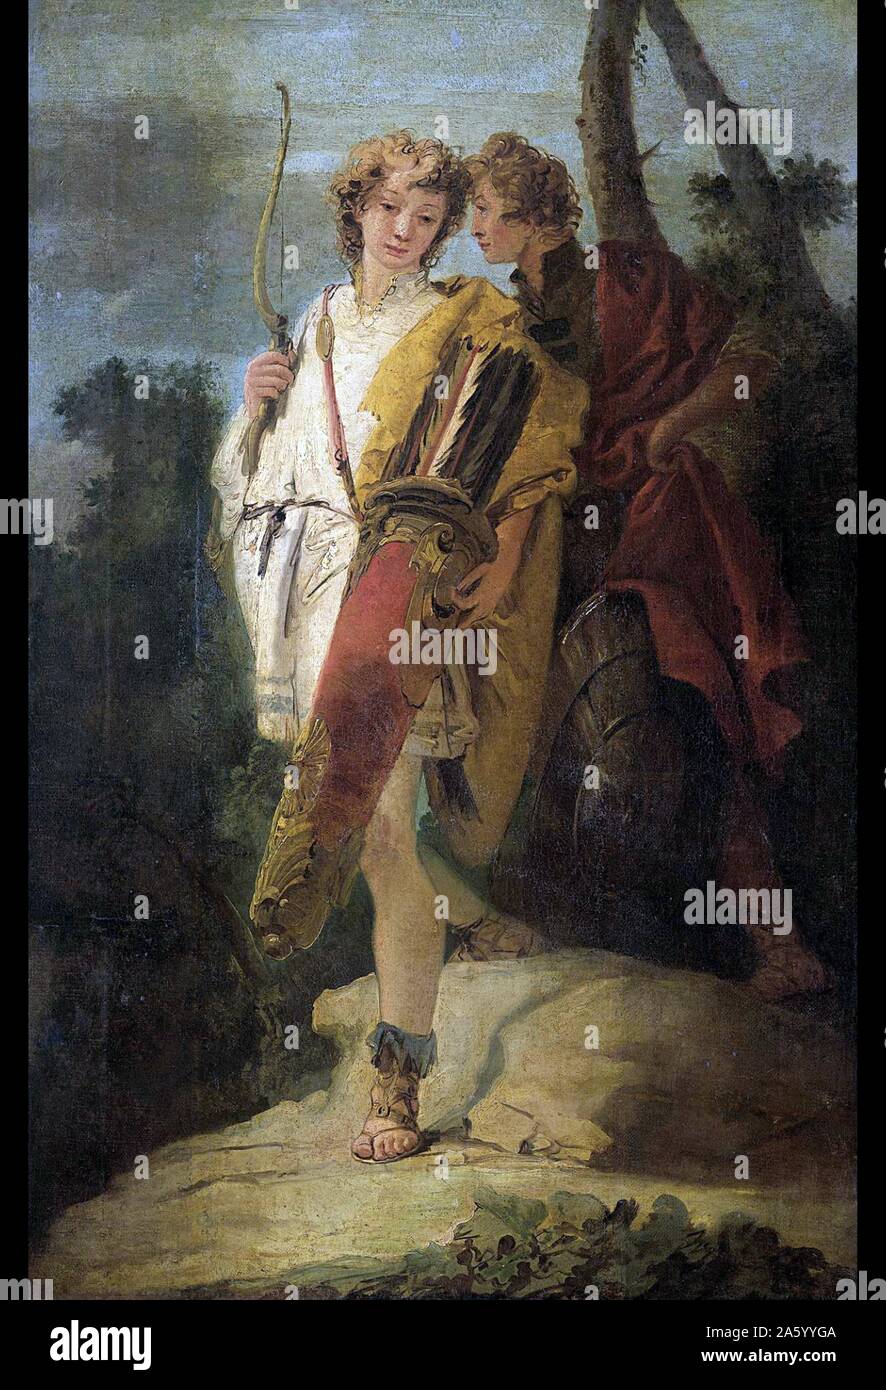 Young Man with Bow and large Quiver and his Companion with a Shield' (also known as Telemachus and Mentor) by Giovanni Battista Tiepolo, 1750. Oil on canvas. Stock Photo